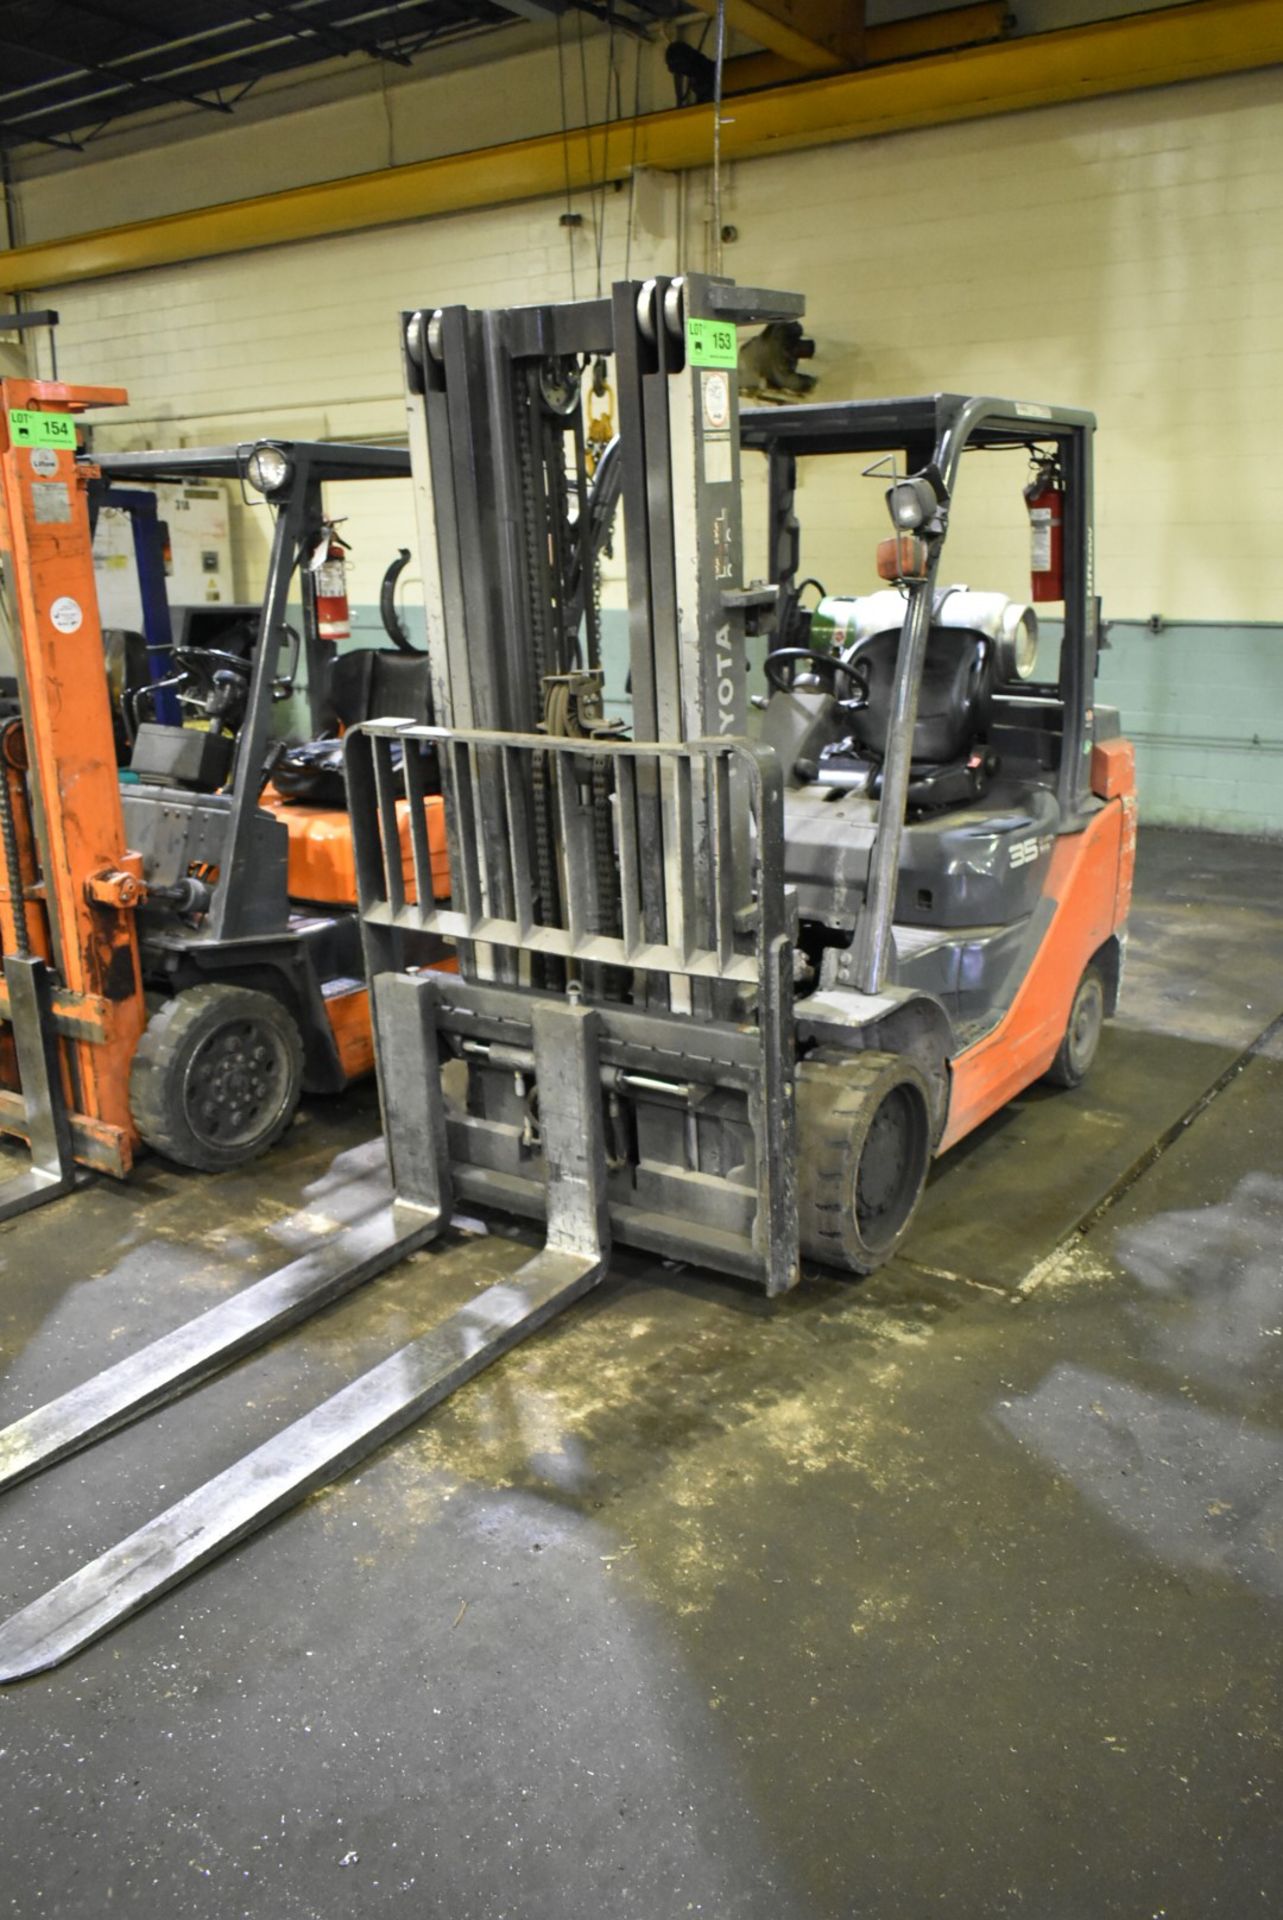 TOYOTA (2018) GC35U LPG FORKLIFT WITH 6400LBS MAX CAPACITY, 187" 3-STAGE HIGH VISIBILITY MAST,